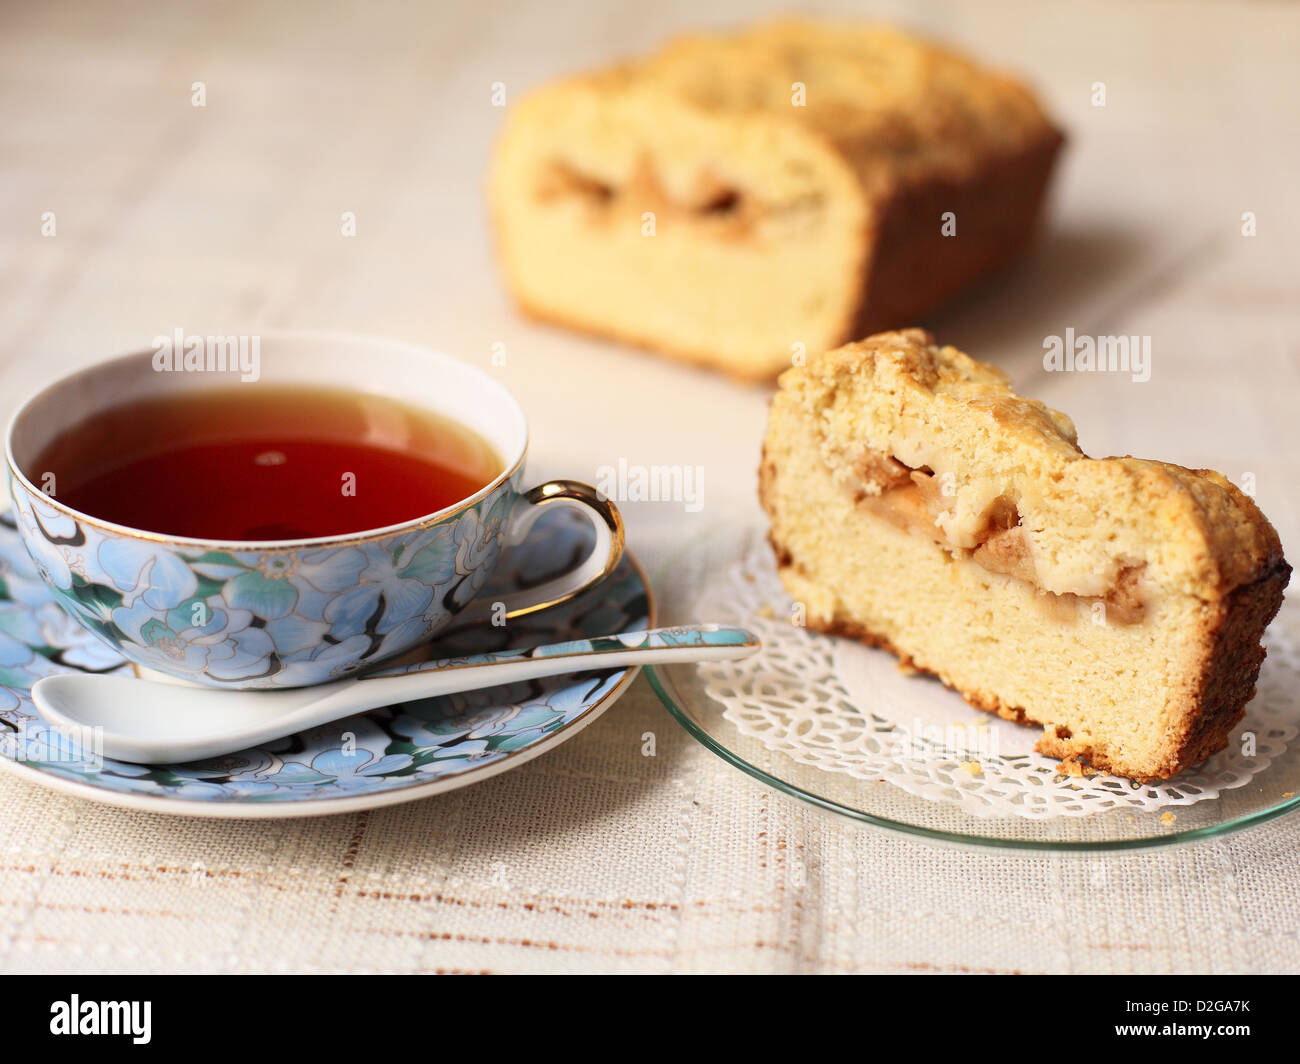 Teacup with cake Stock Photo